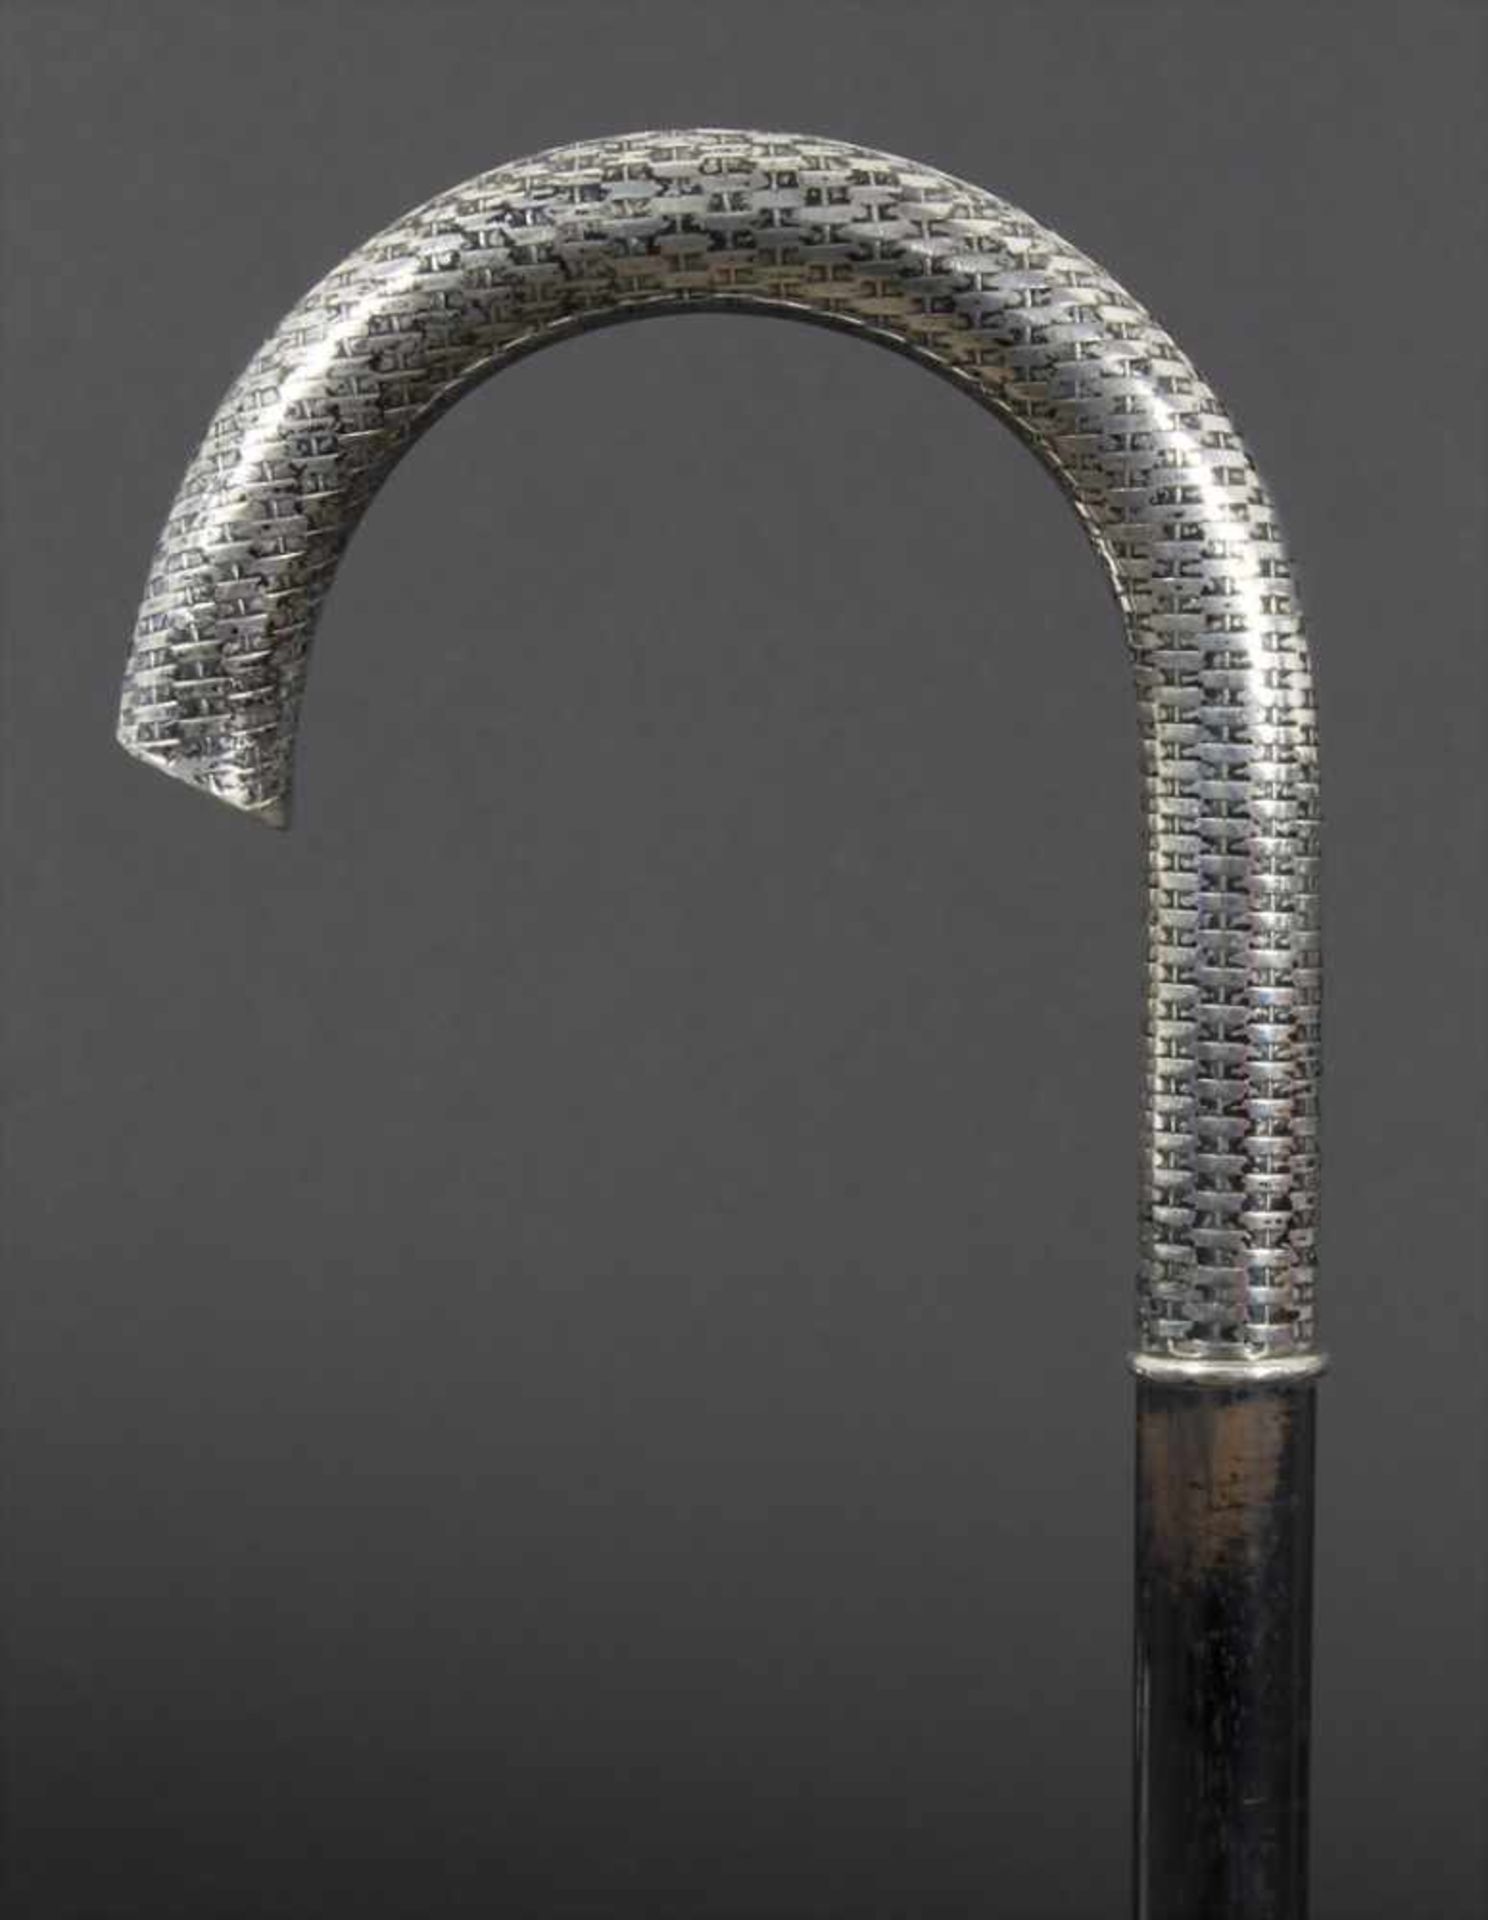 Gehstock mit Silbergriff 'Weidengeflecht' / A cane with silver handleMaterial: Hartholz,